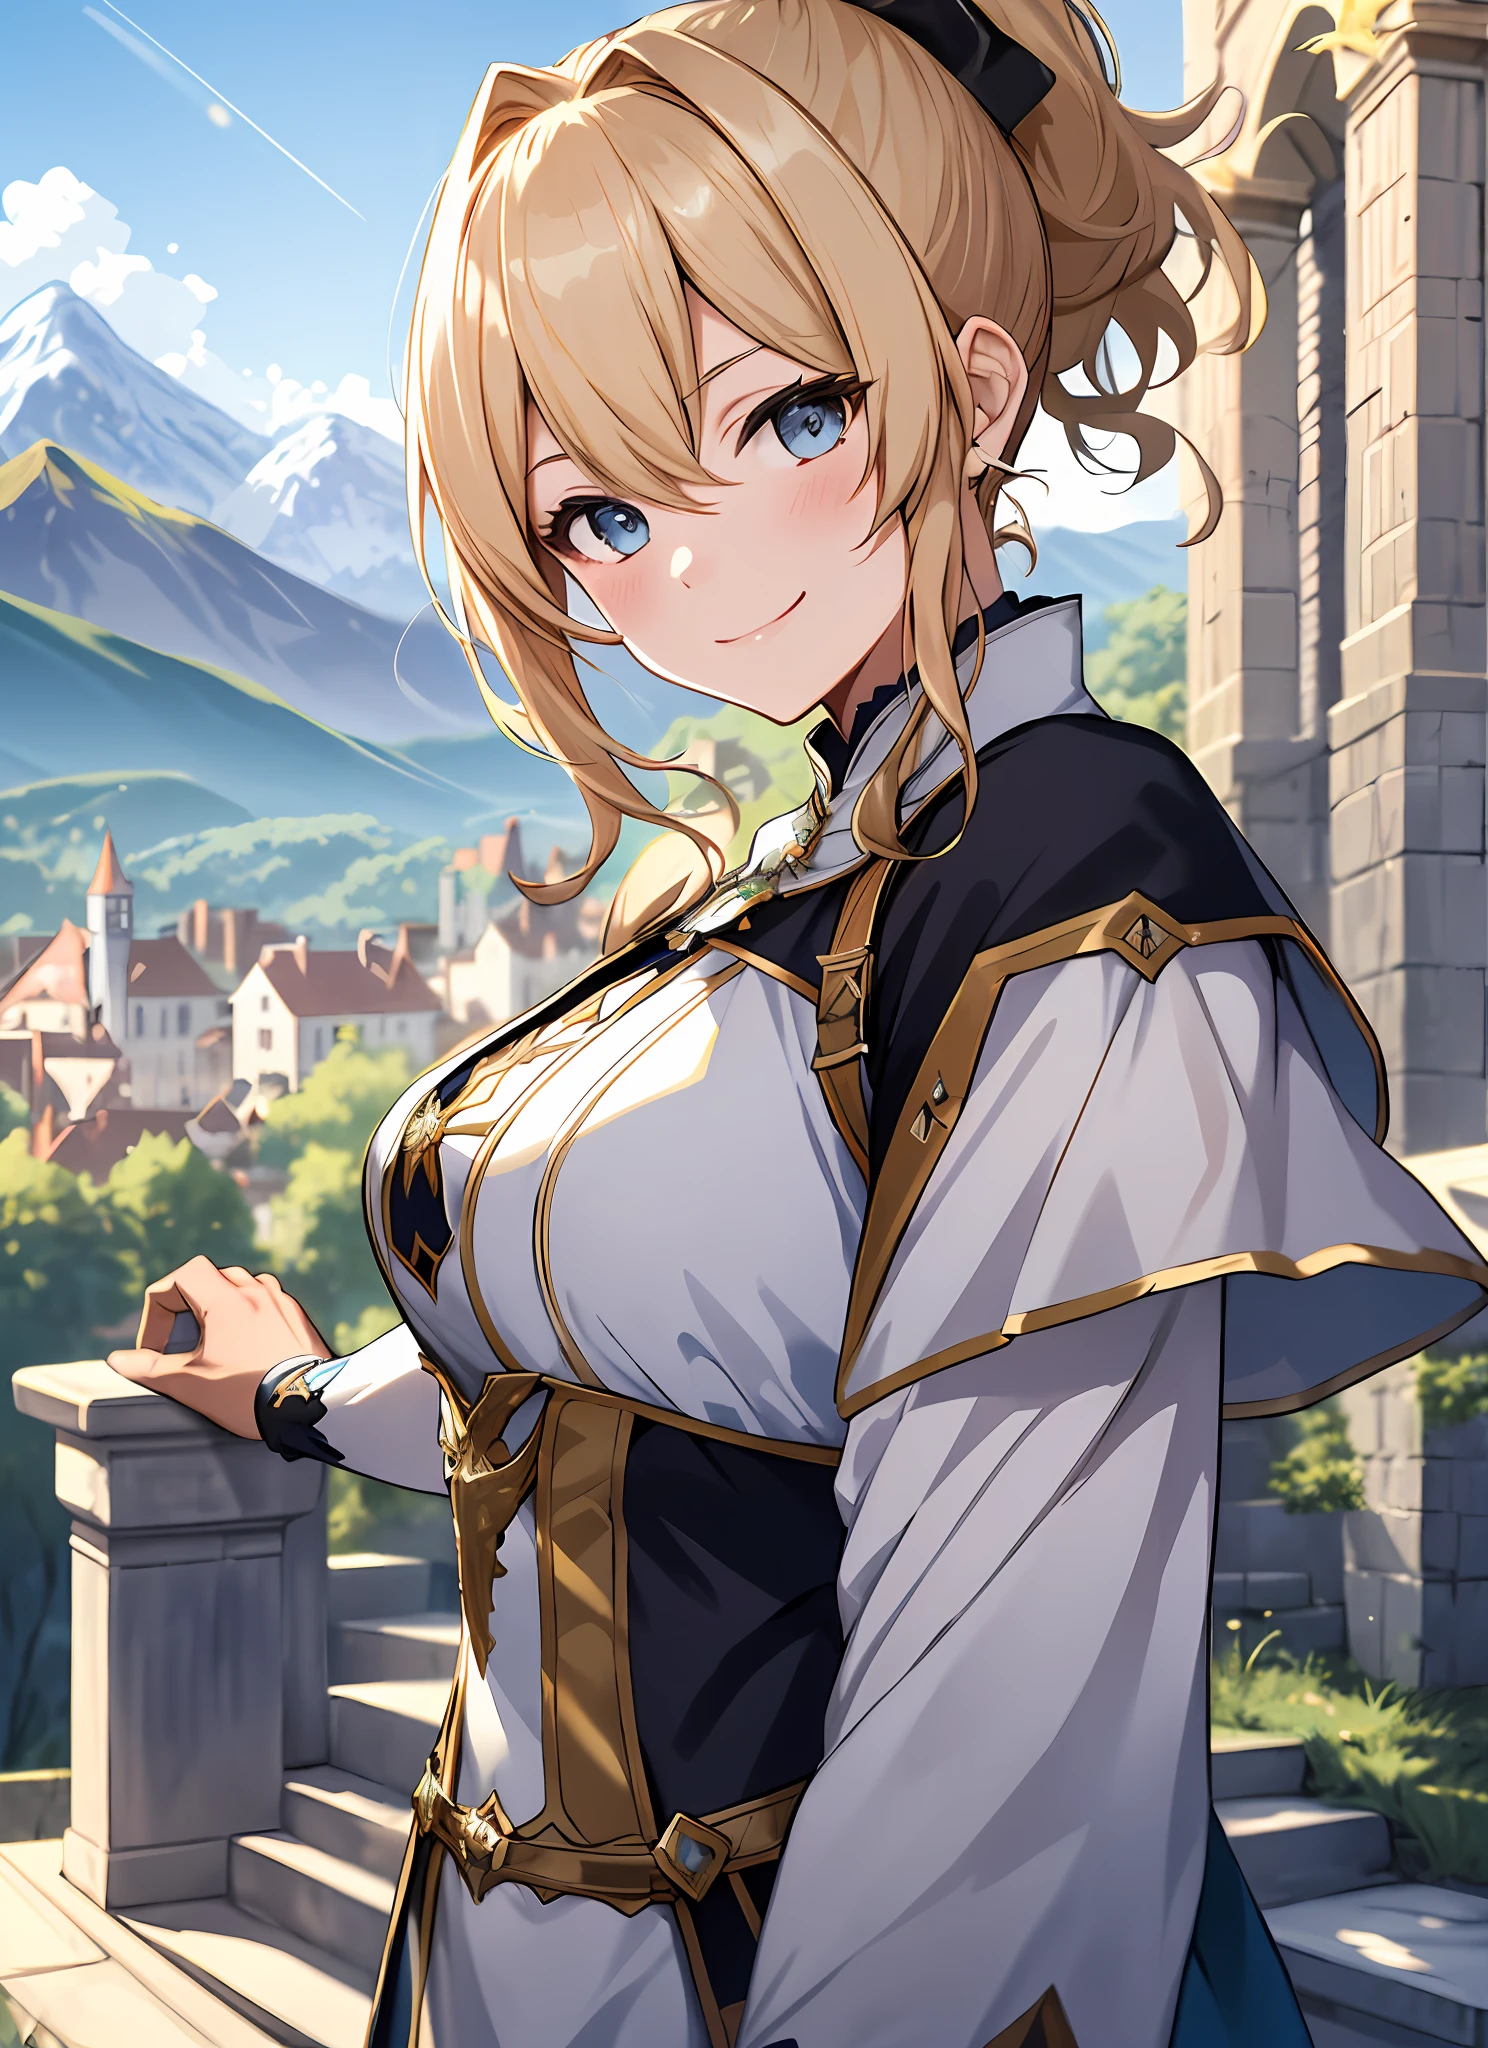 Elegant anime female character, golden ponytail, smile, blush, medieval knight aristocratic costume, outdoor, daytime, simple background, blue sky, sky, medieval castle, looking at the audience, stairs, mountains, movie lighting effects, large aperture portrait, dynamic pose